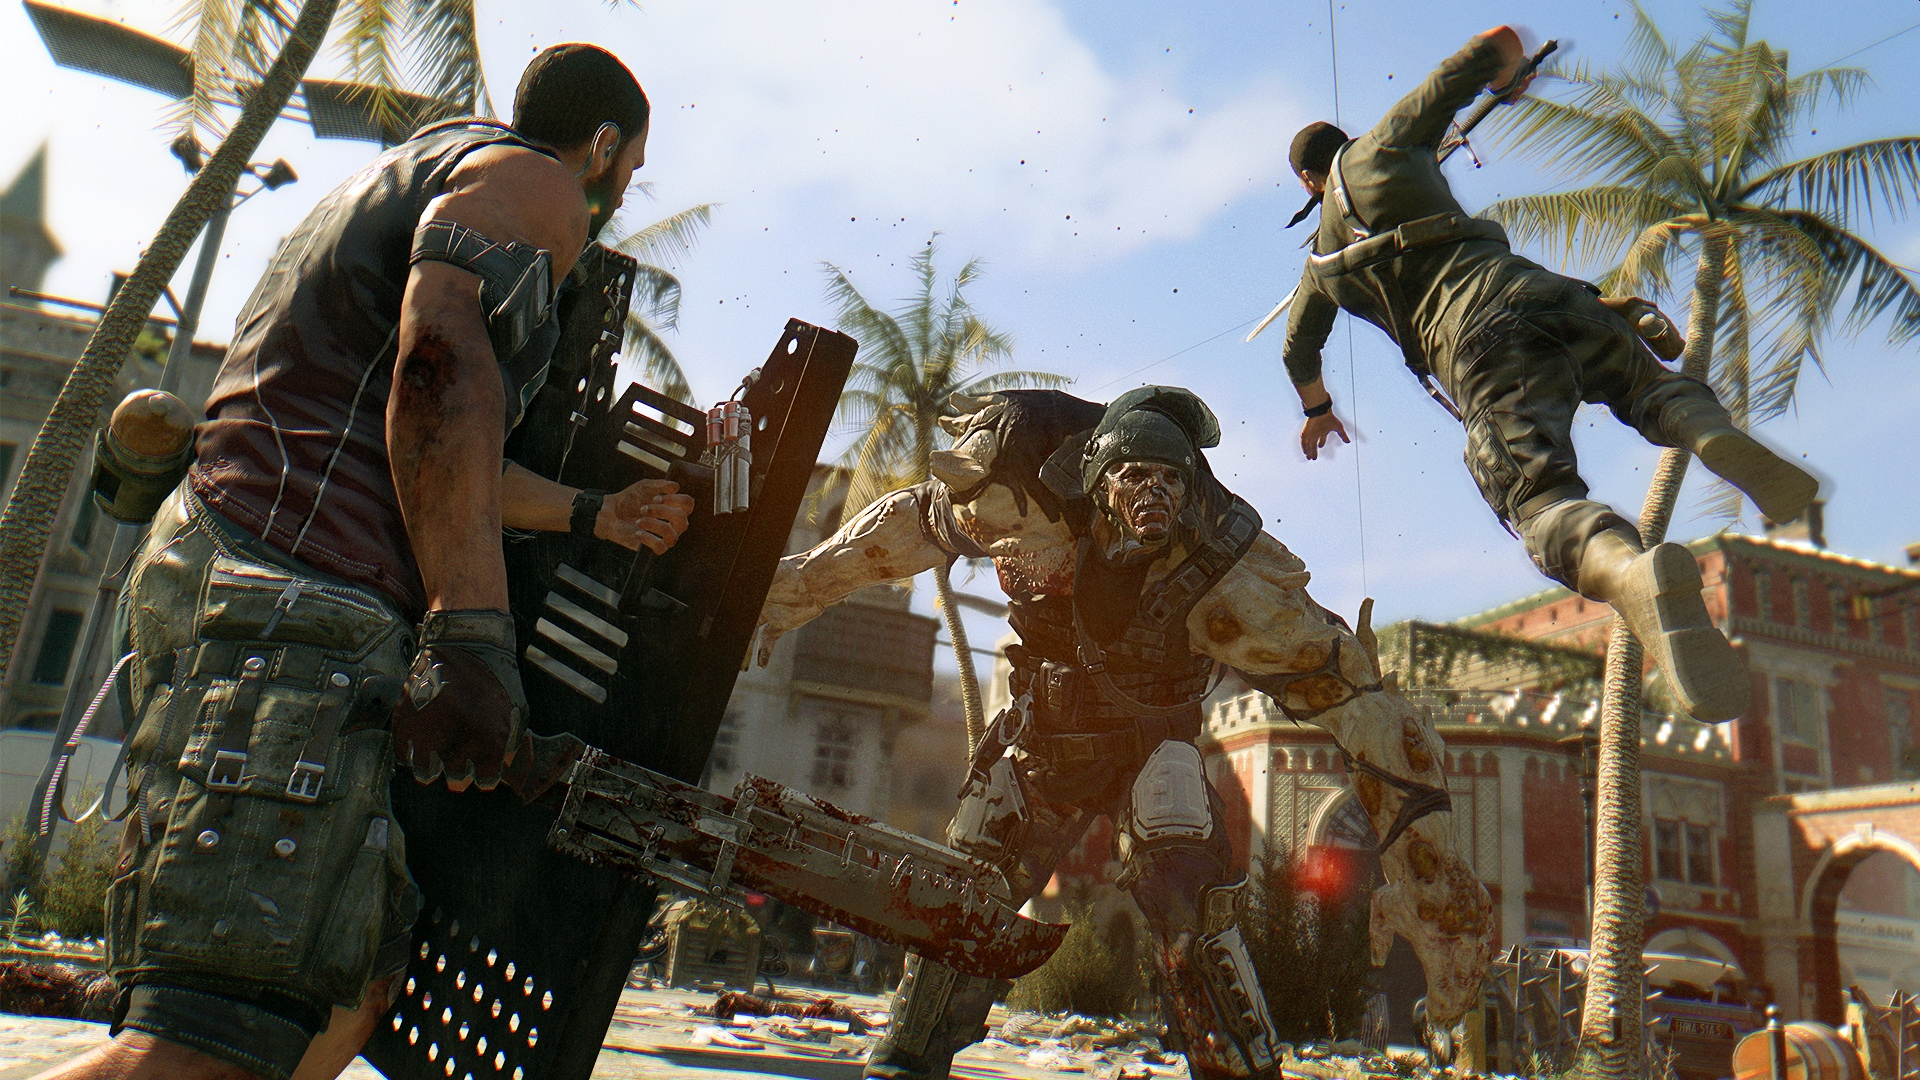 Dying Light Soars To Over 100,000 User Reviews On Steam Thanks To January Community Event